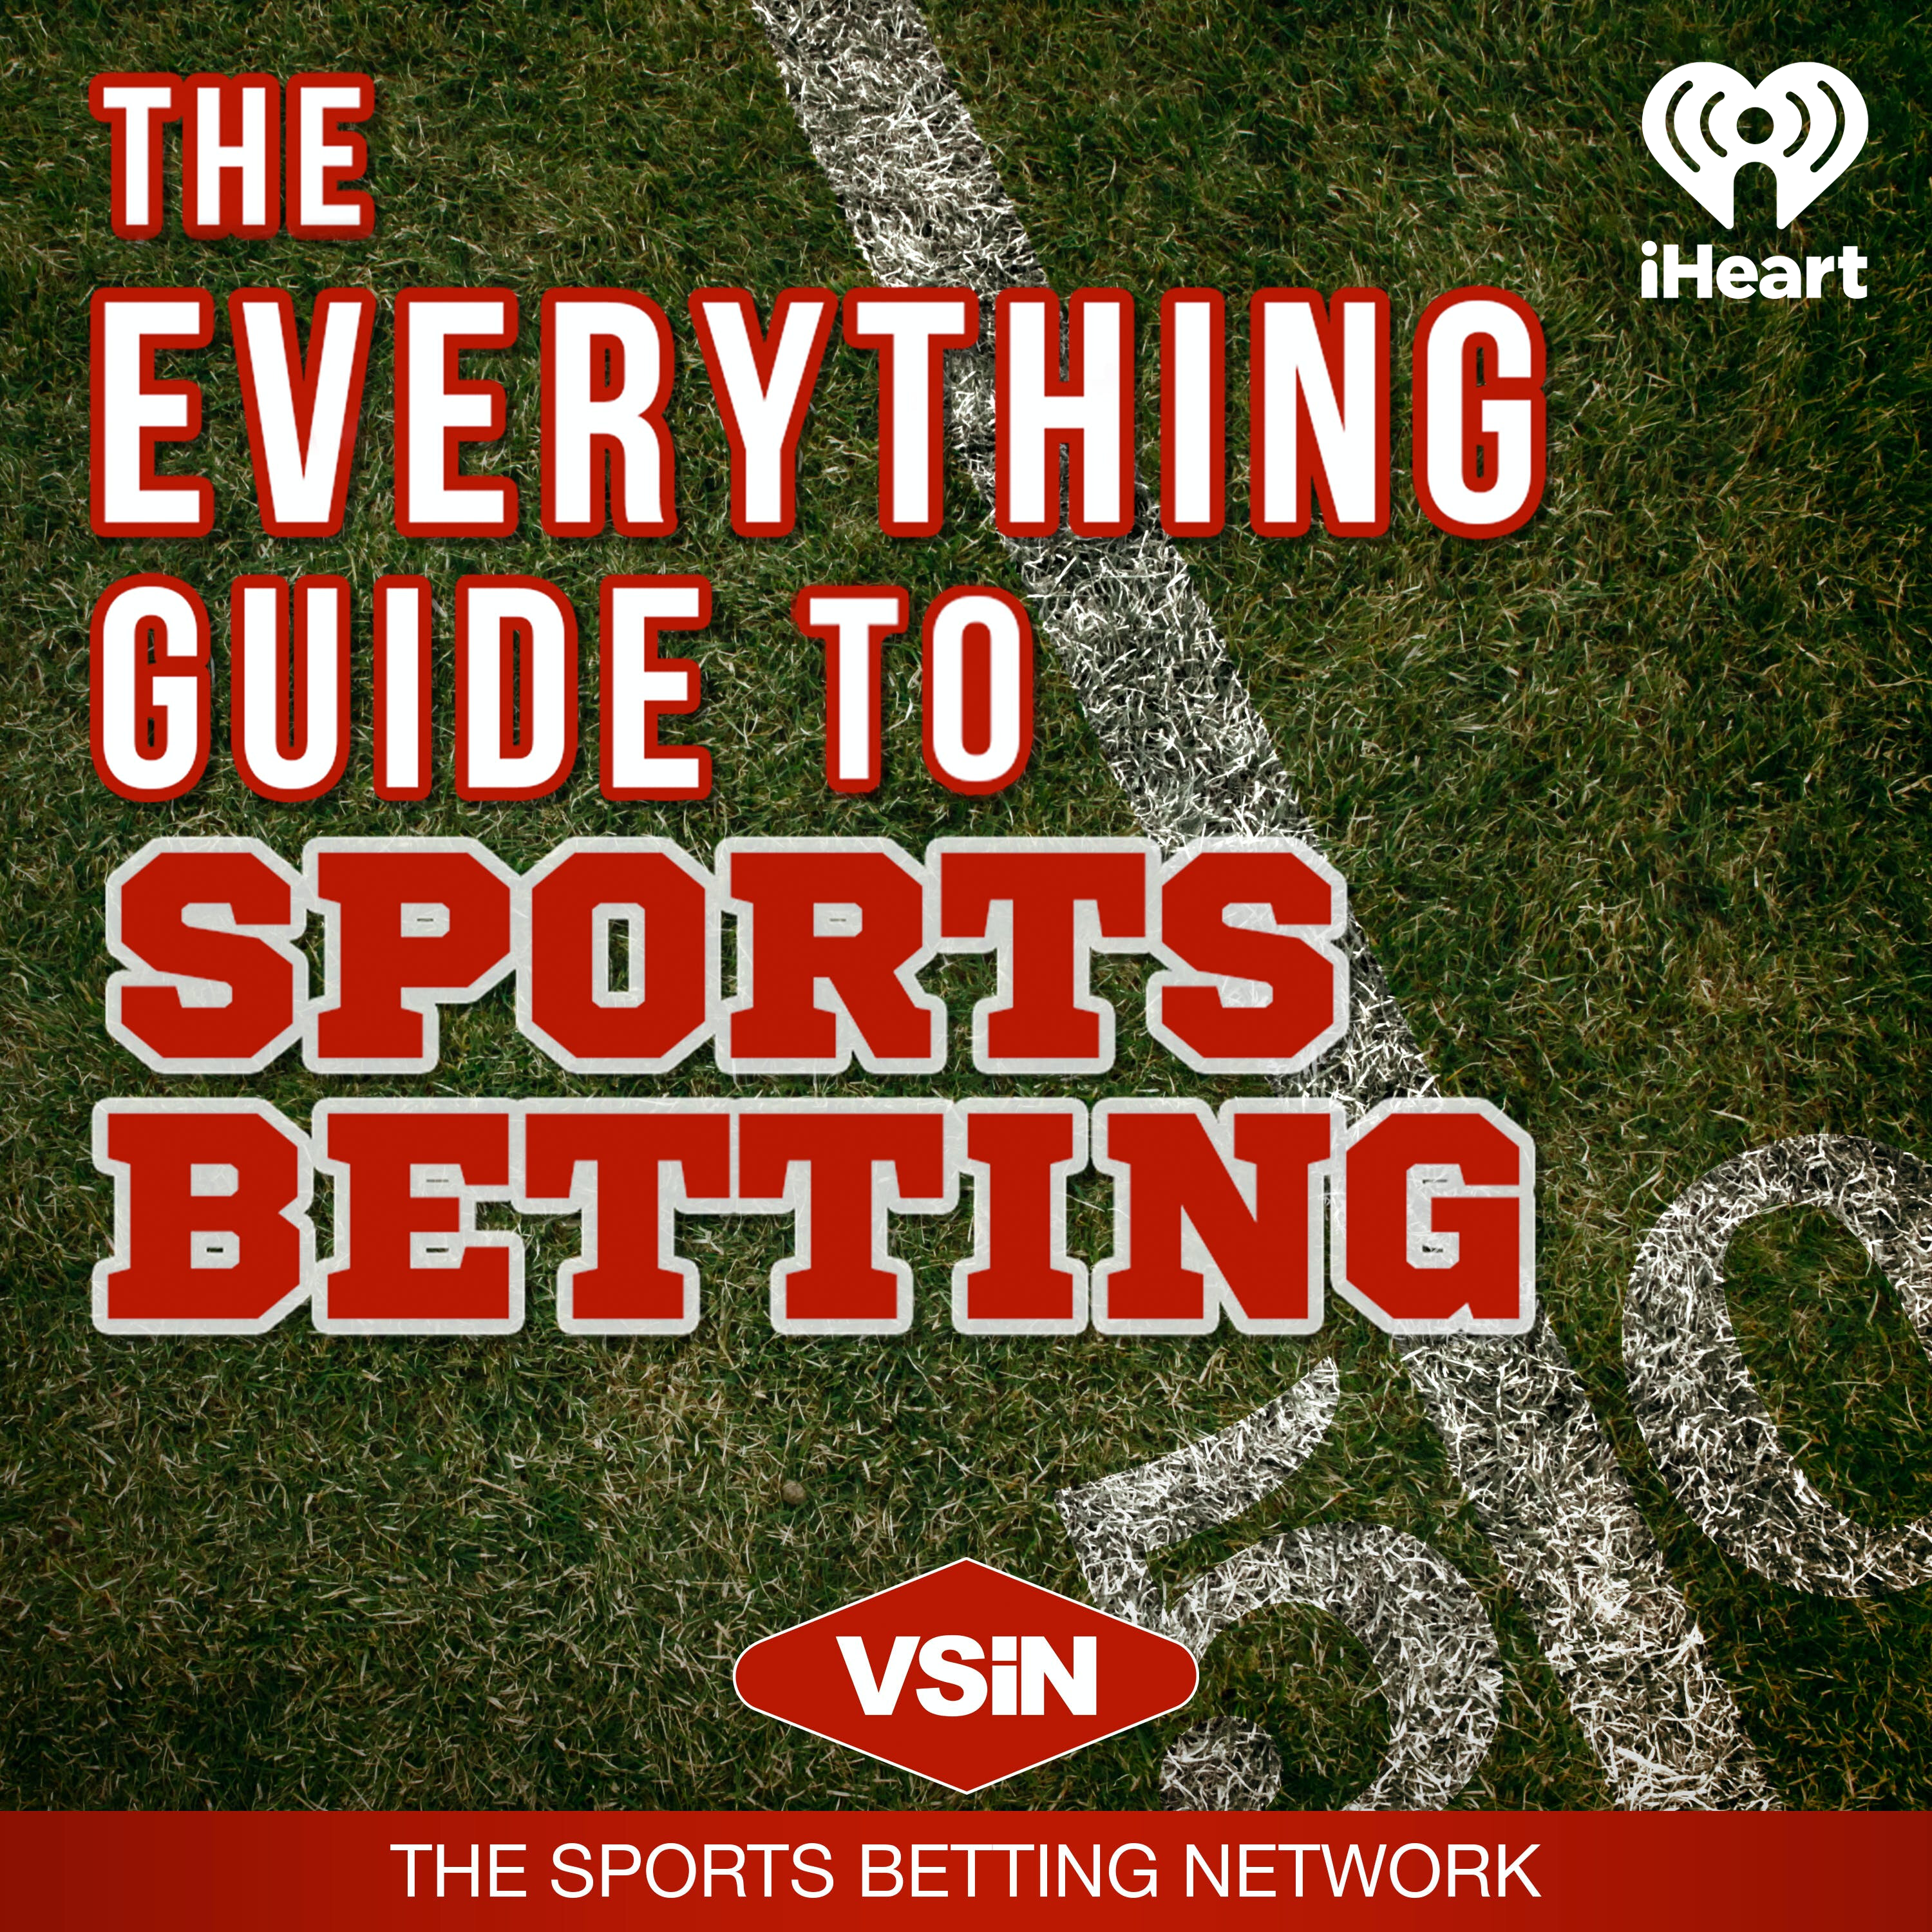 Everything Guide to Sports Betting | December 23, 2020